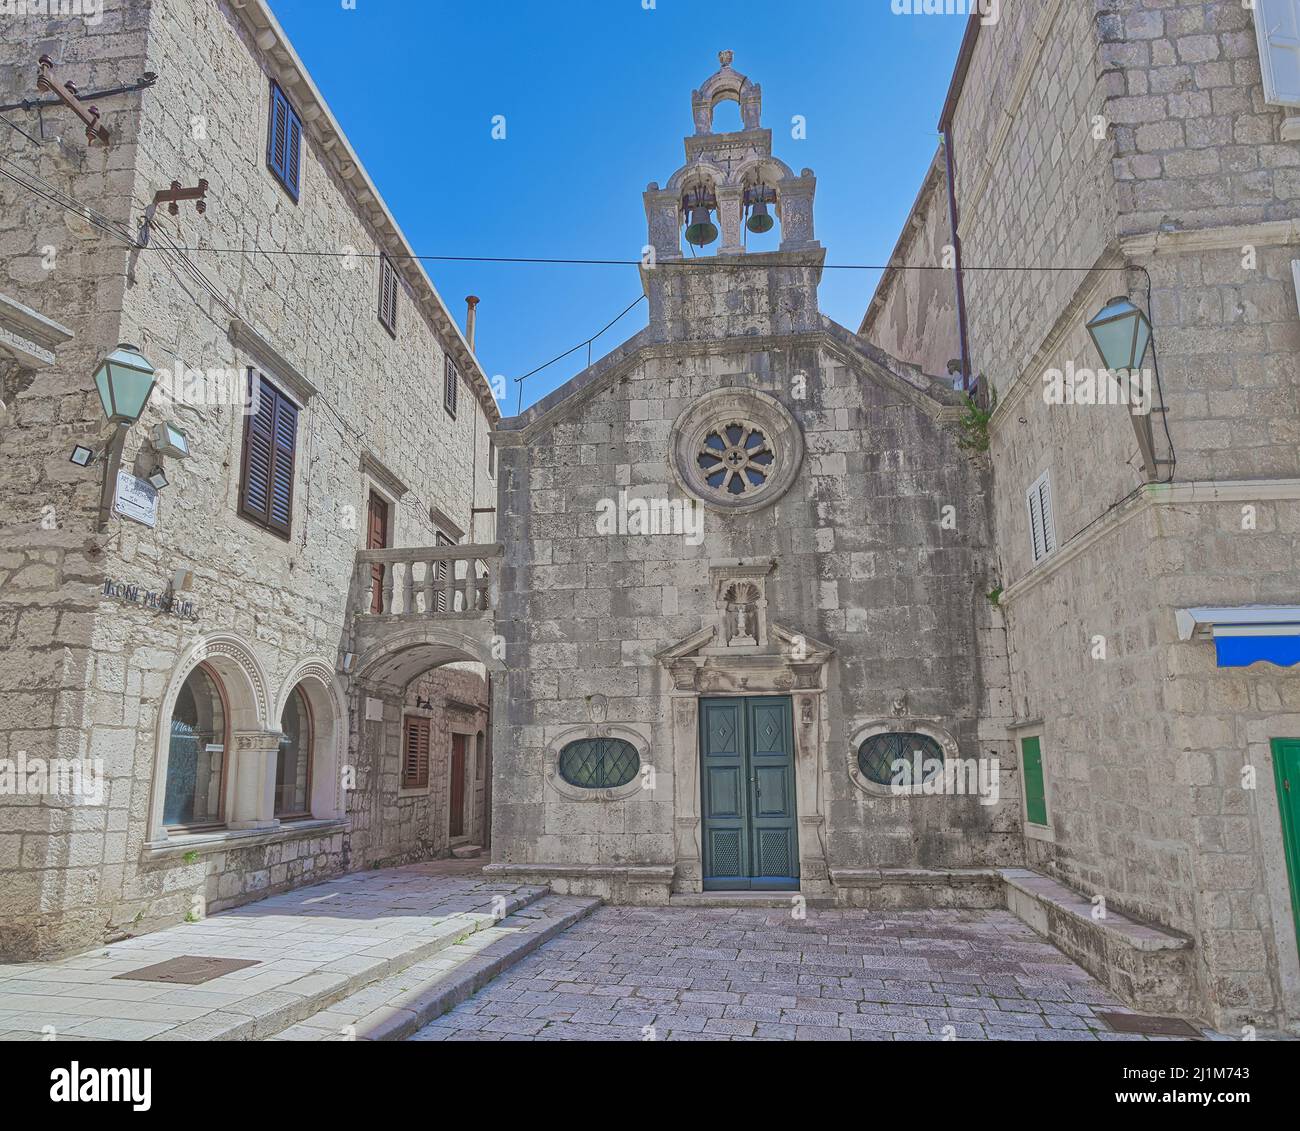 St Michael Church in The Old medieval town of Korcula Stock Photo